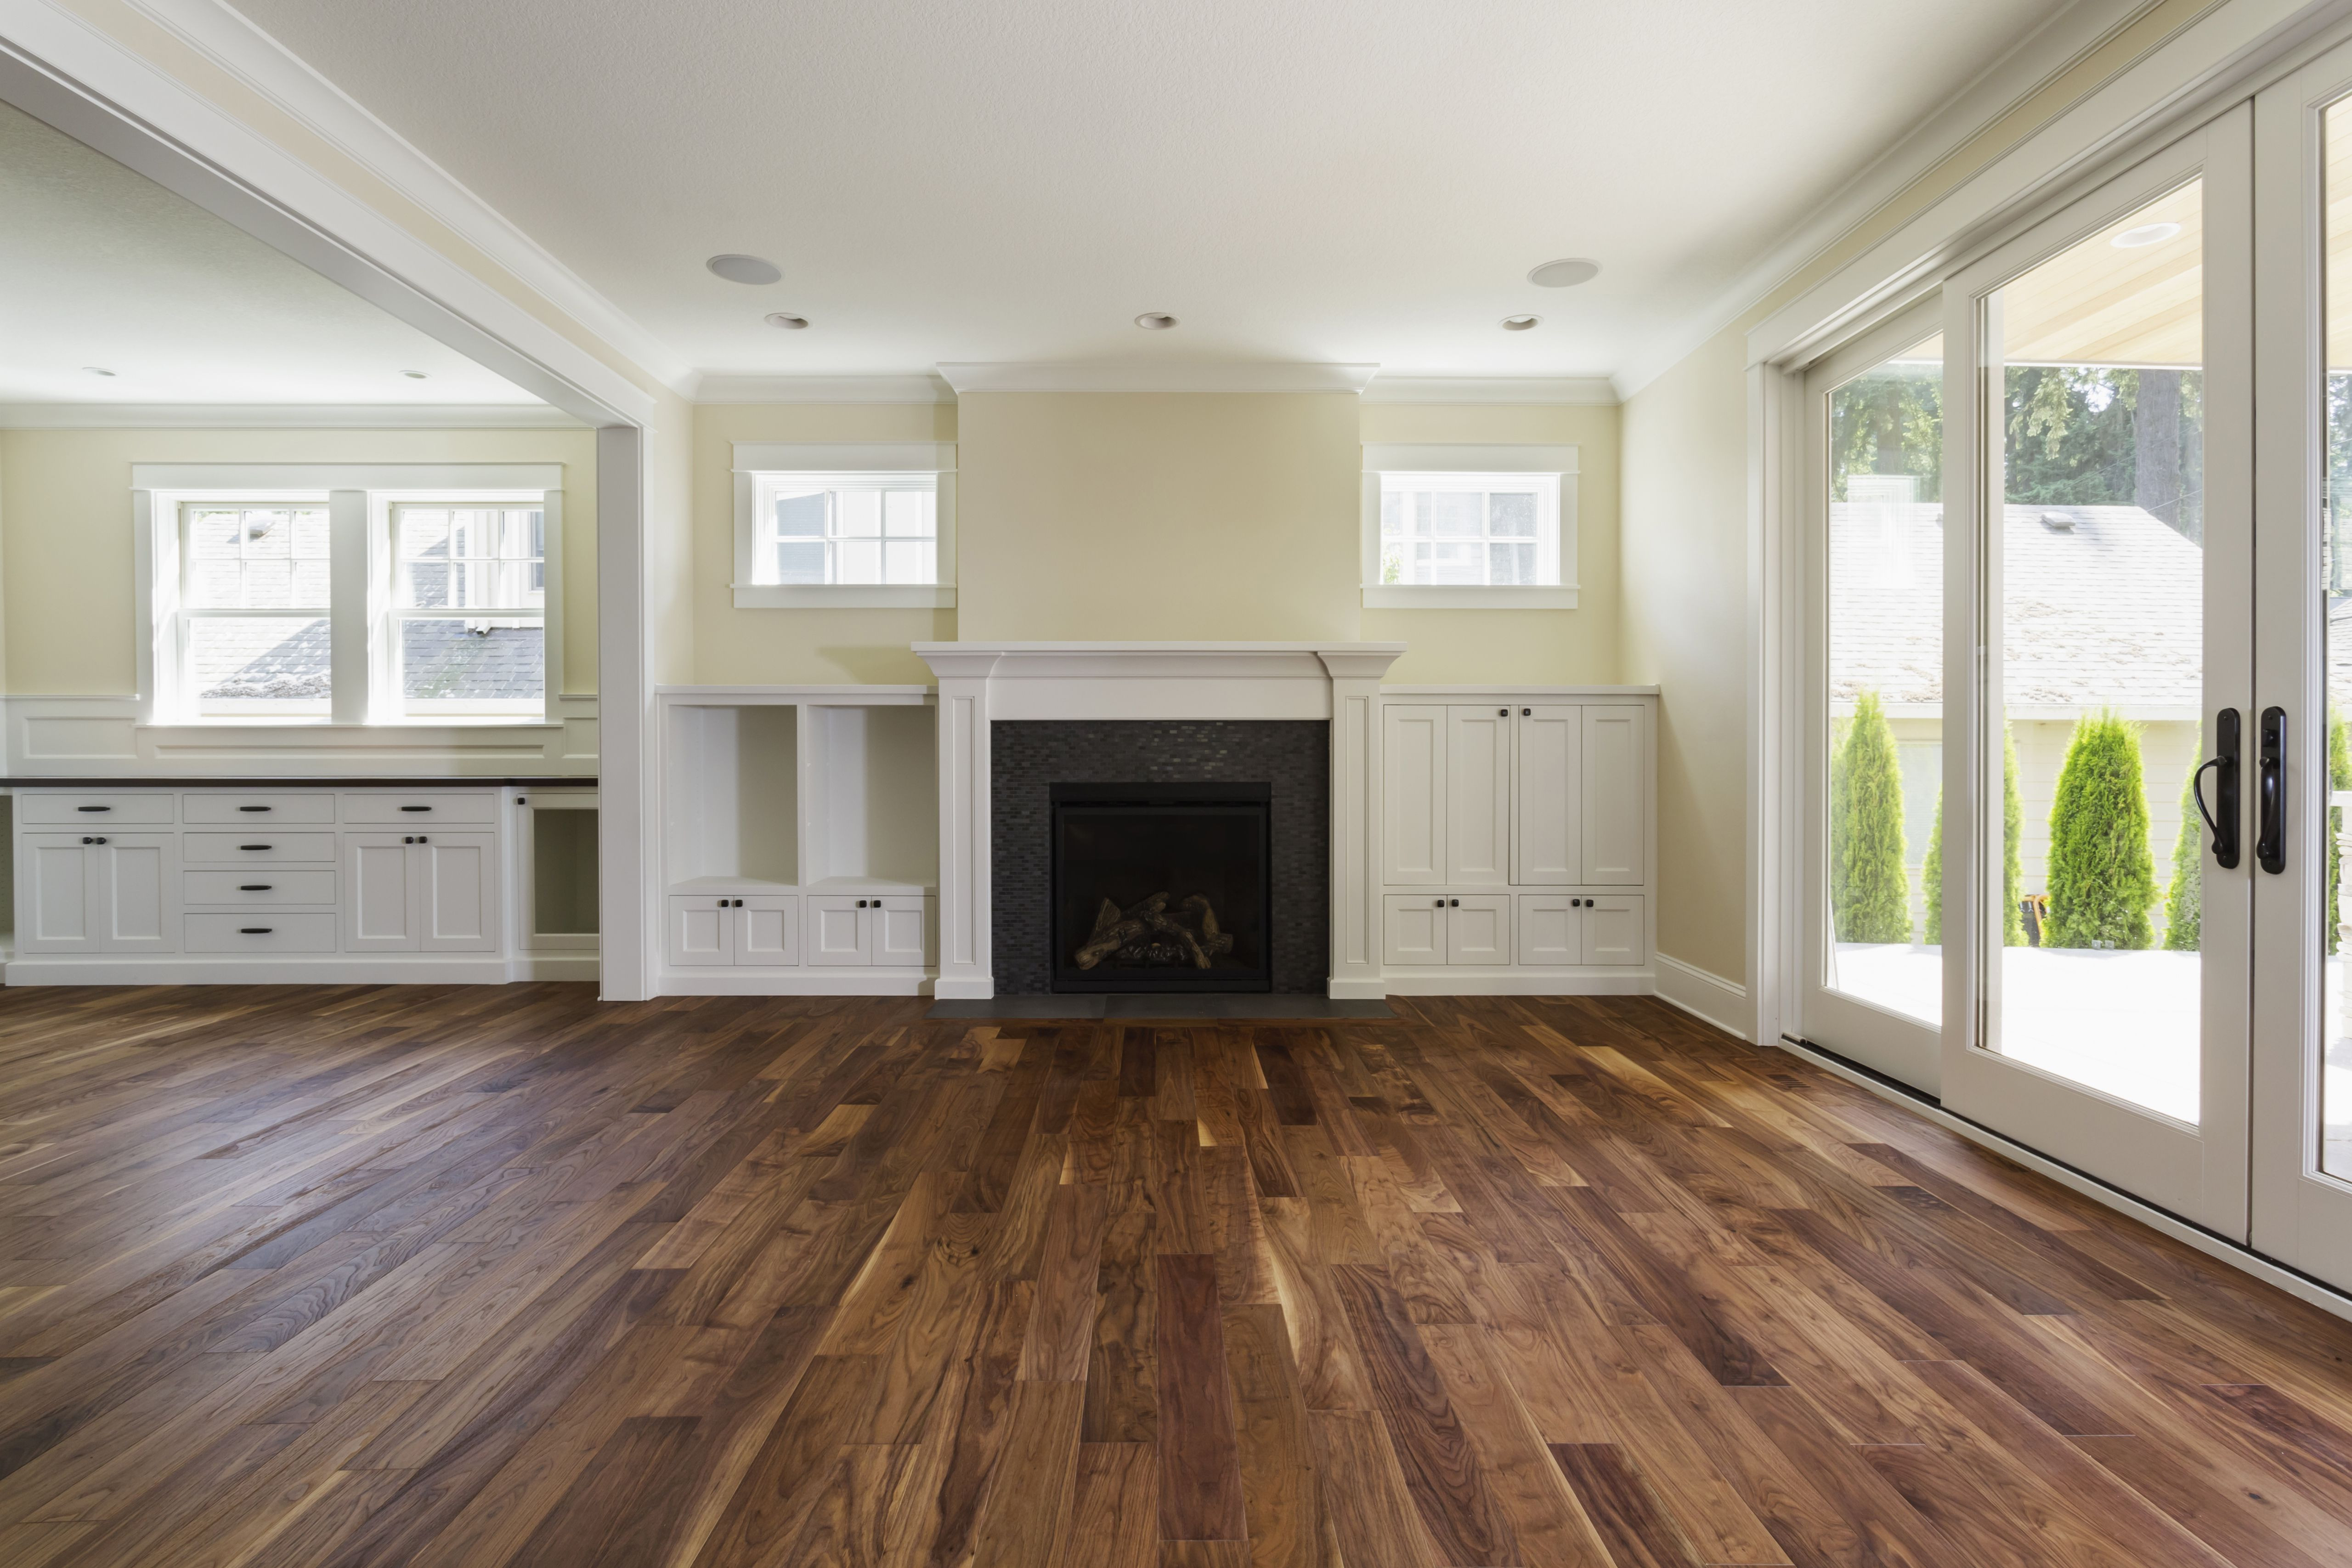 17 Stunning Best Hardwood Floor Installers Near Me 2024 free download best hardwood floor installers near me of the pros and cons of prefinished hardwood flooring intended for fireplace and built in shelves in living room 482143011 57bef8e33df78cc16e035397